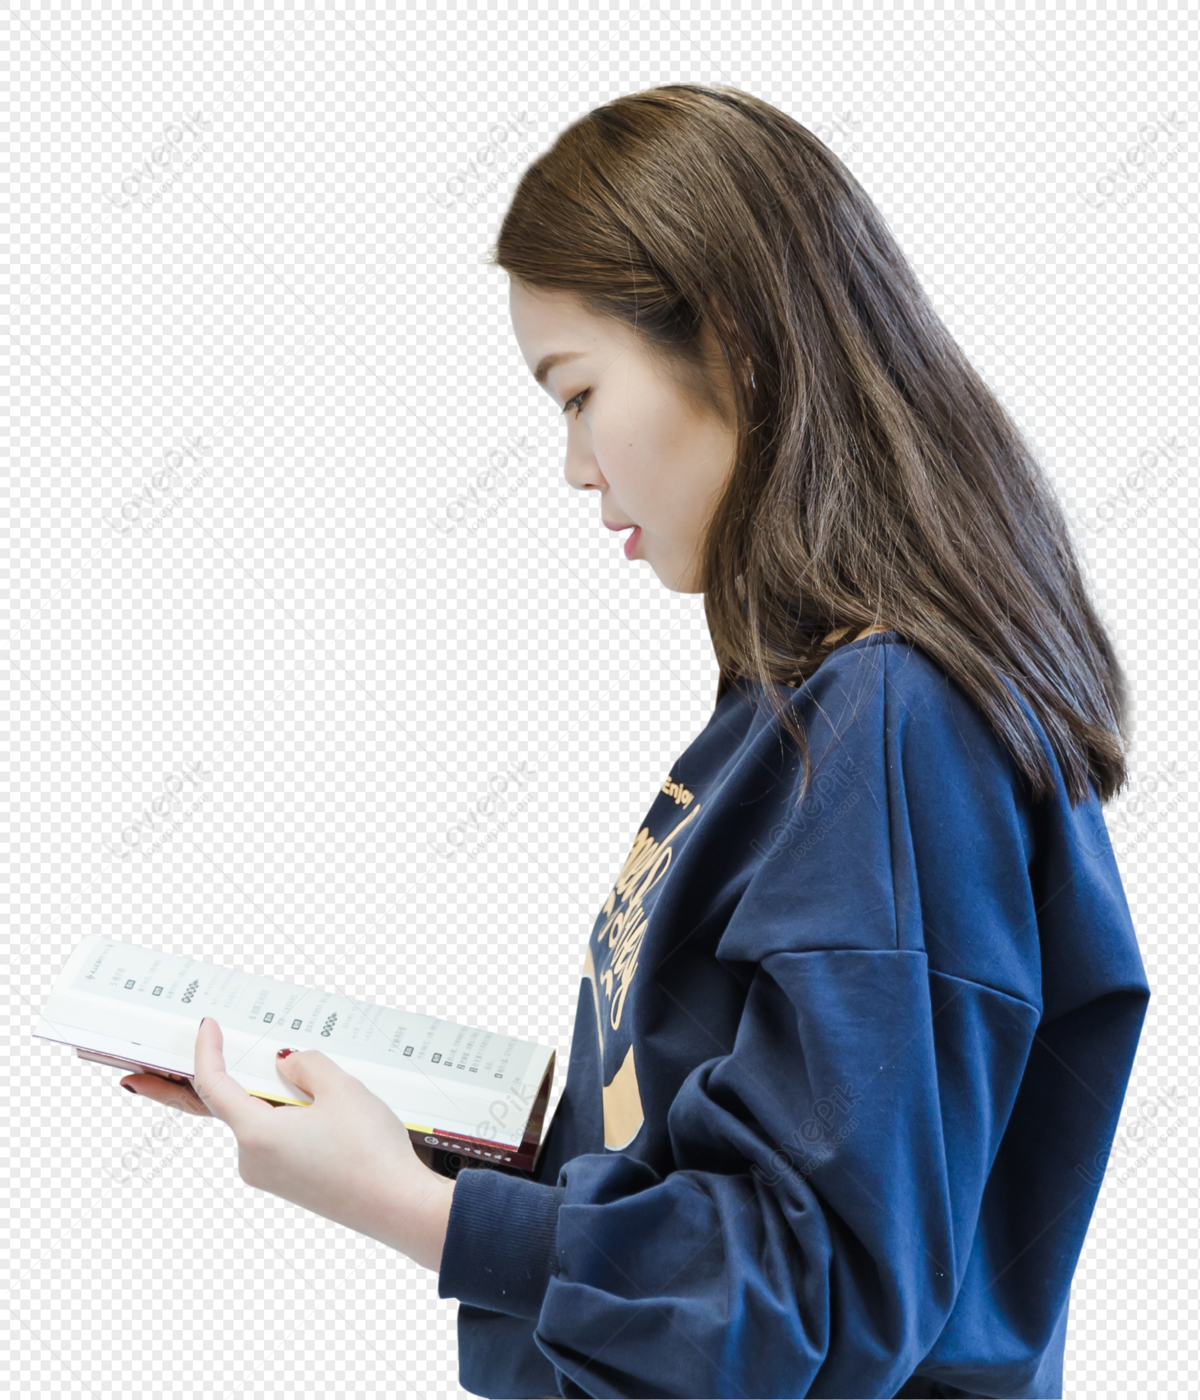 Girls who read books quietly in Libraries, japanese woman, book woman, blue dark png white transparent